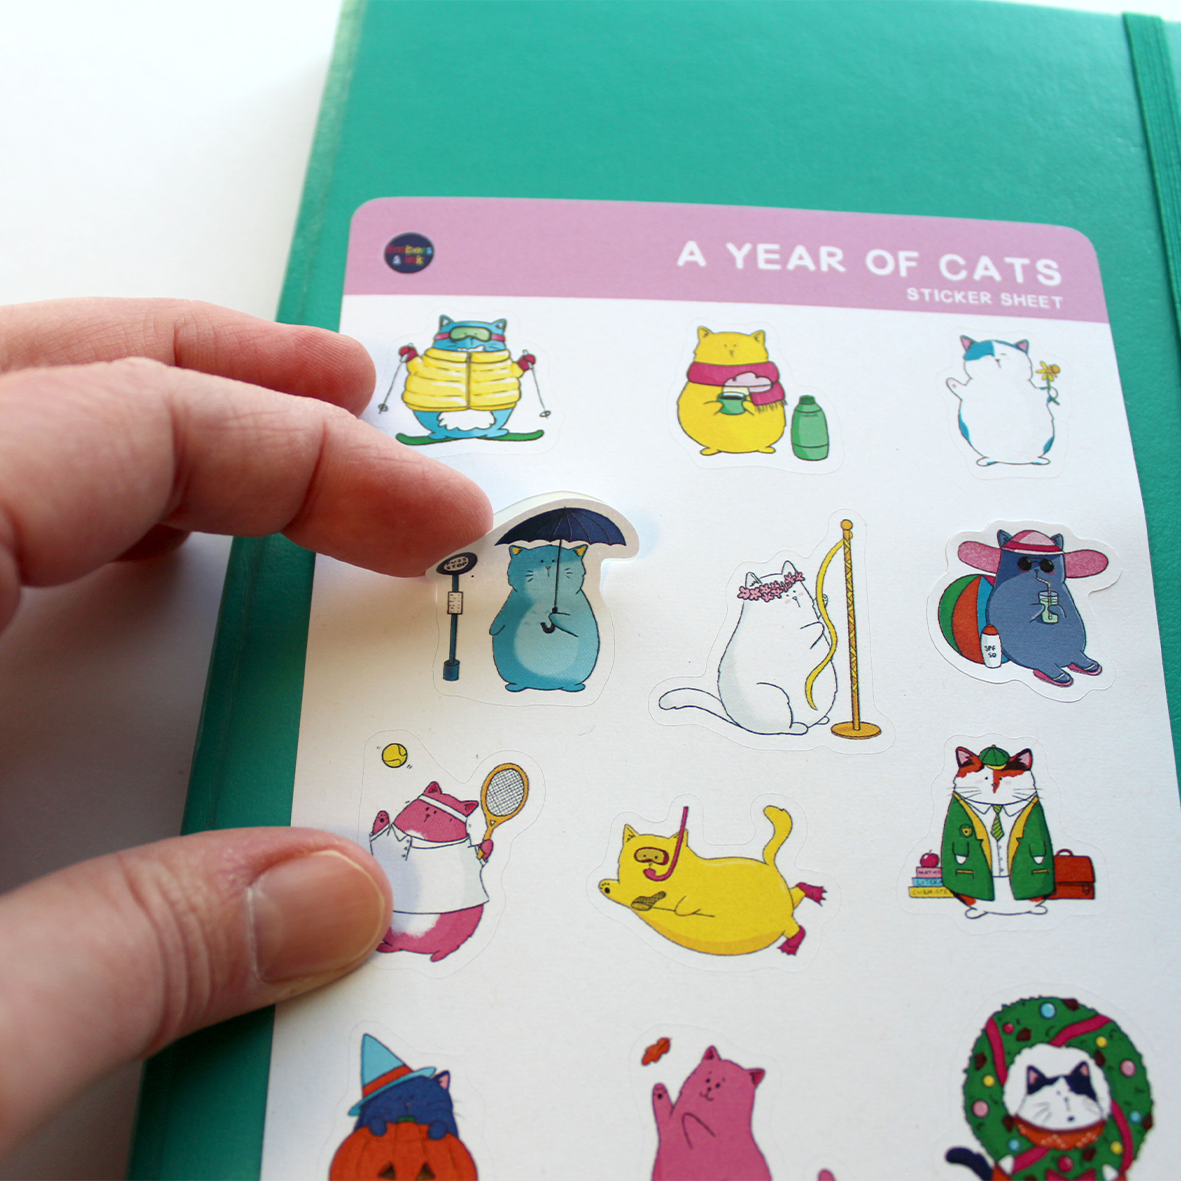 A hand is shown easily peeling one of the cat stickers from the sheet.